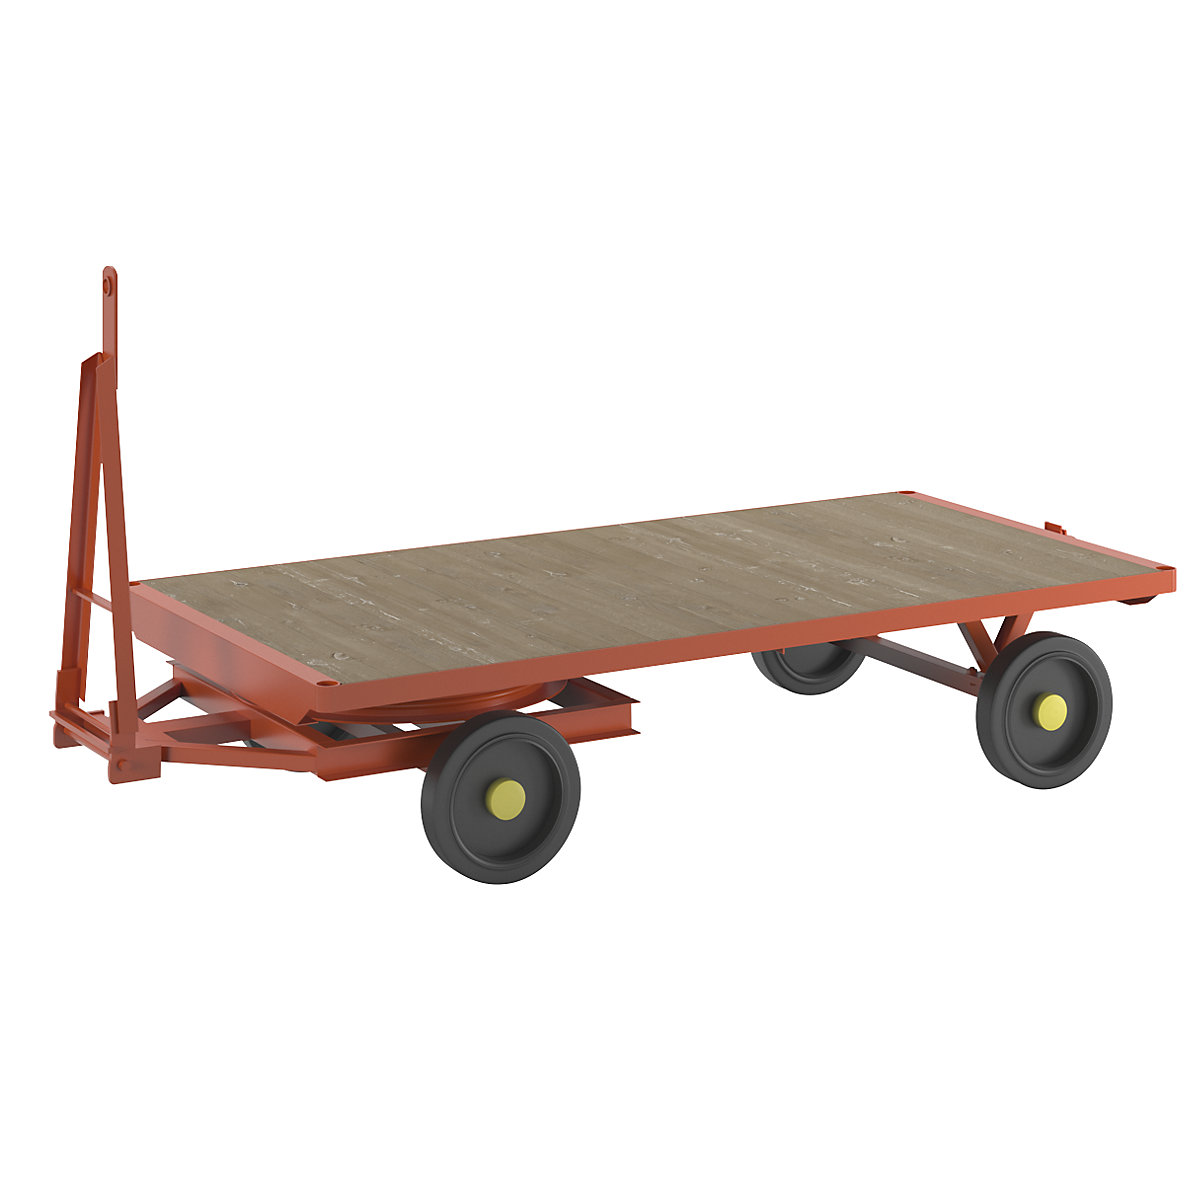 Trailer, 2-wheel turntable steering, max. load 3 t, platform 2.5 x 1.25 m, solid rubber tyres-14